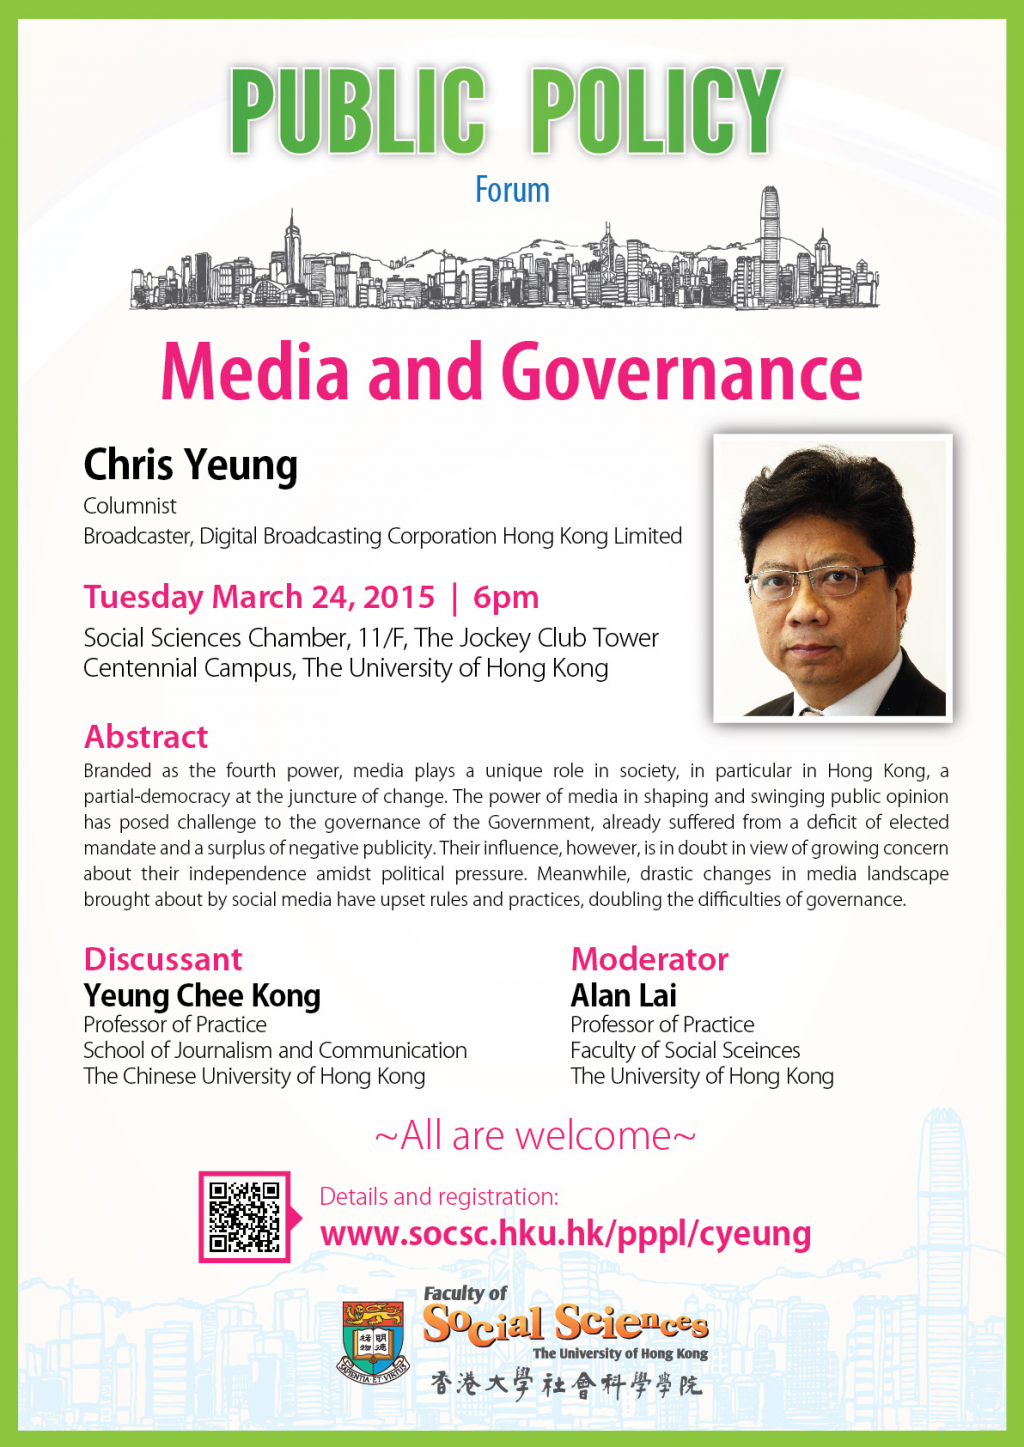 Public Policy Forum: Media and Governance